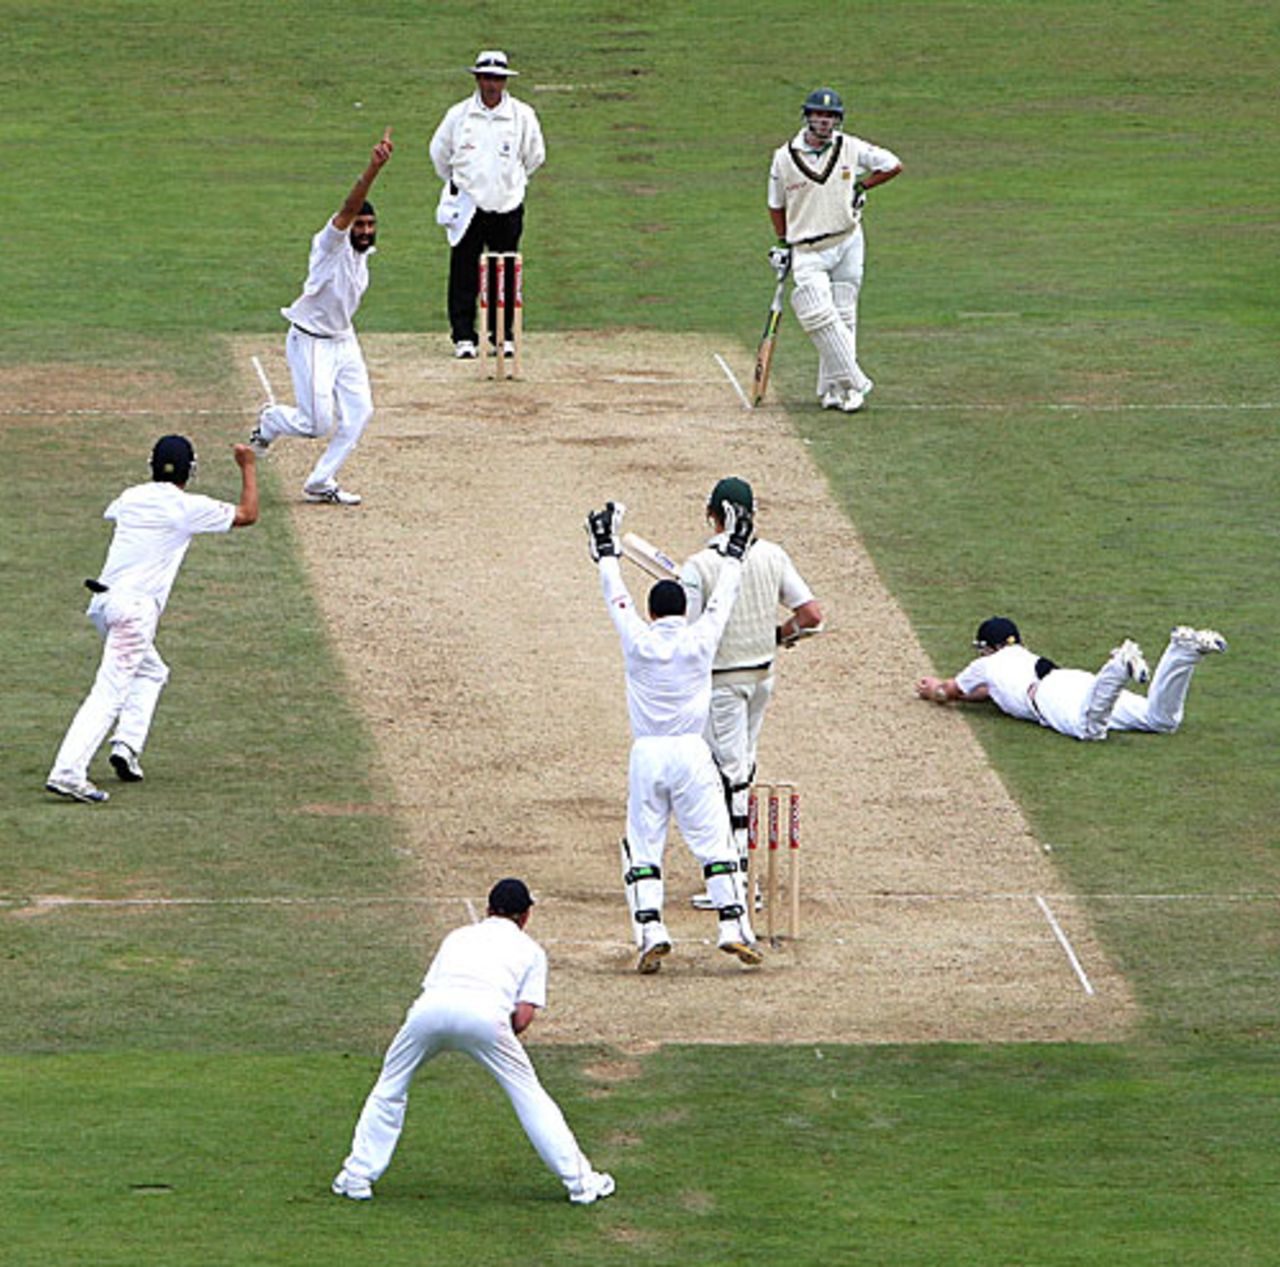 Monty Panesar celebrates as Ian Ball catches Morne Morkel, England v South Africa, 4th Test, The Oval, August 10, 2008